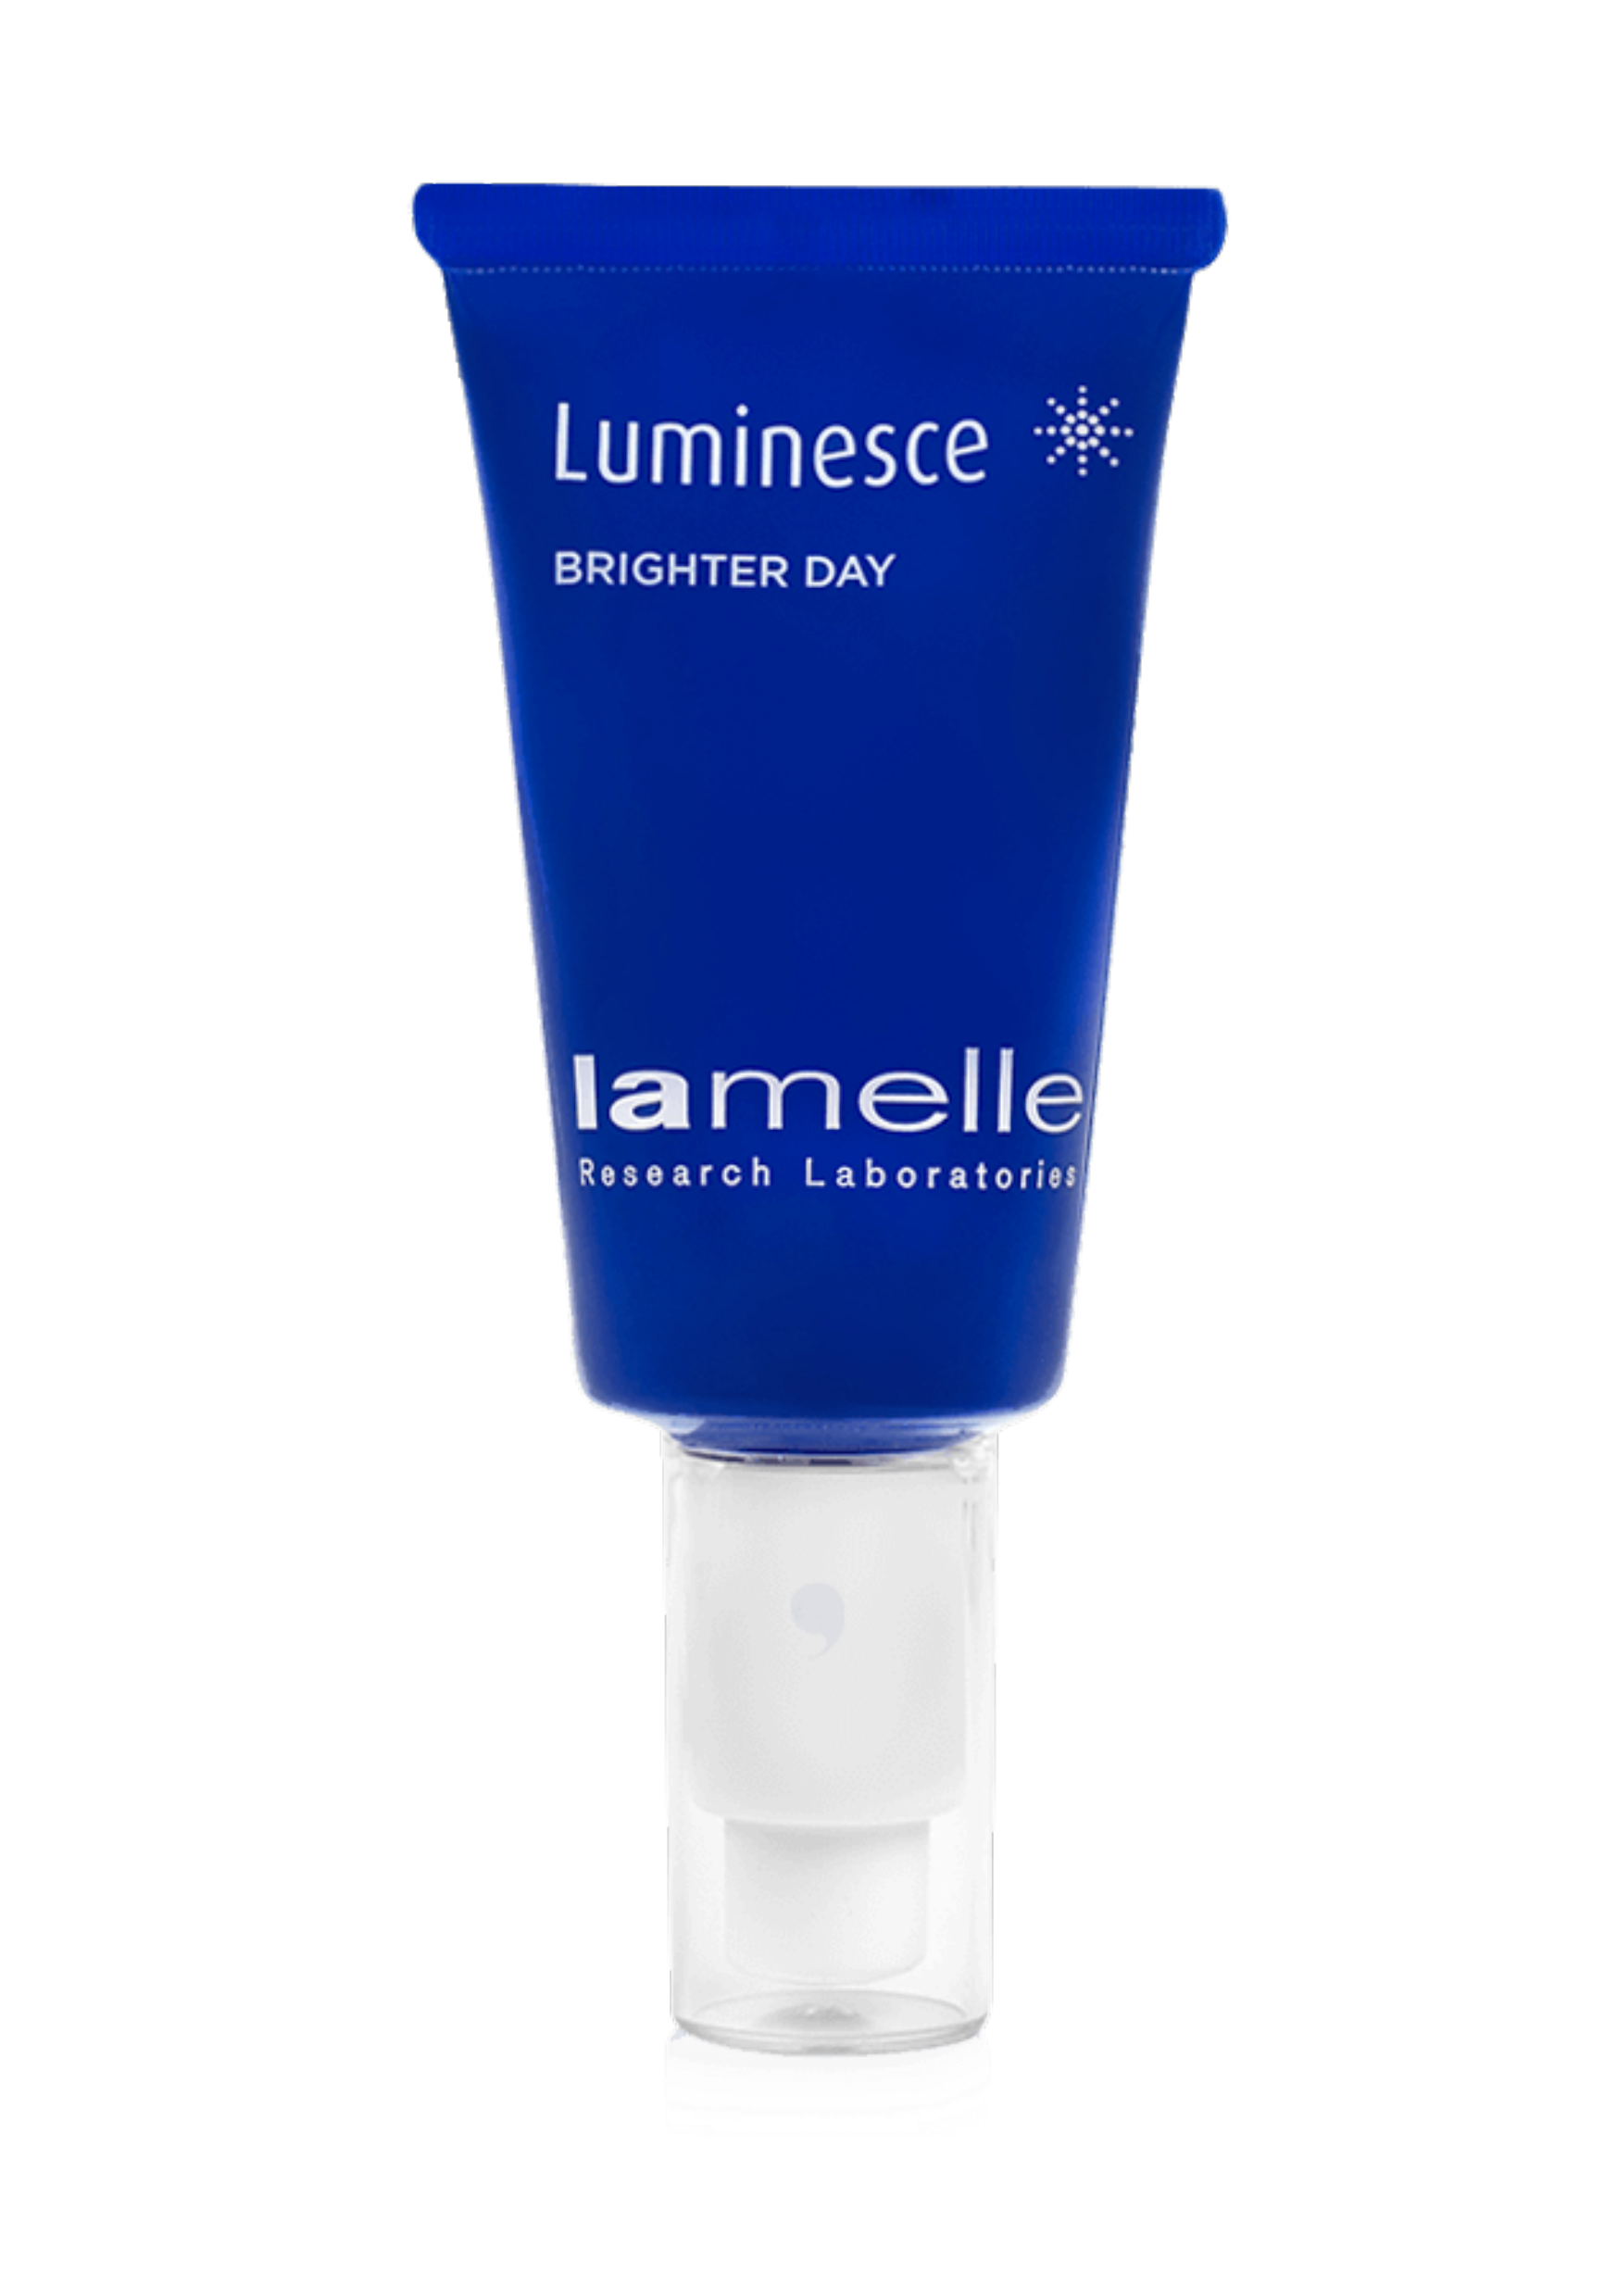 Lamelle® Luminesce Brighter Day